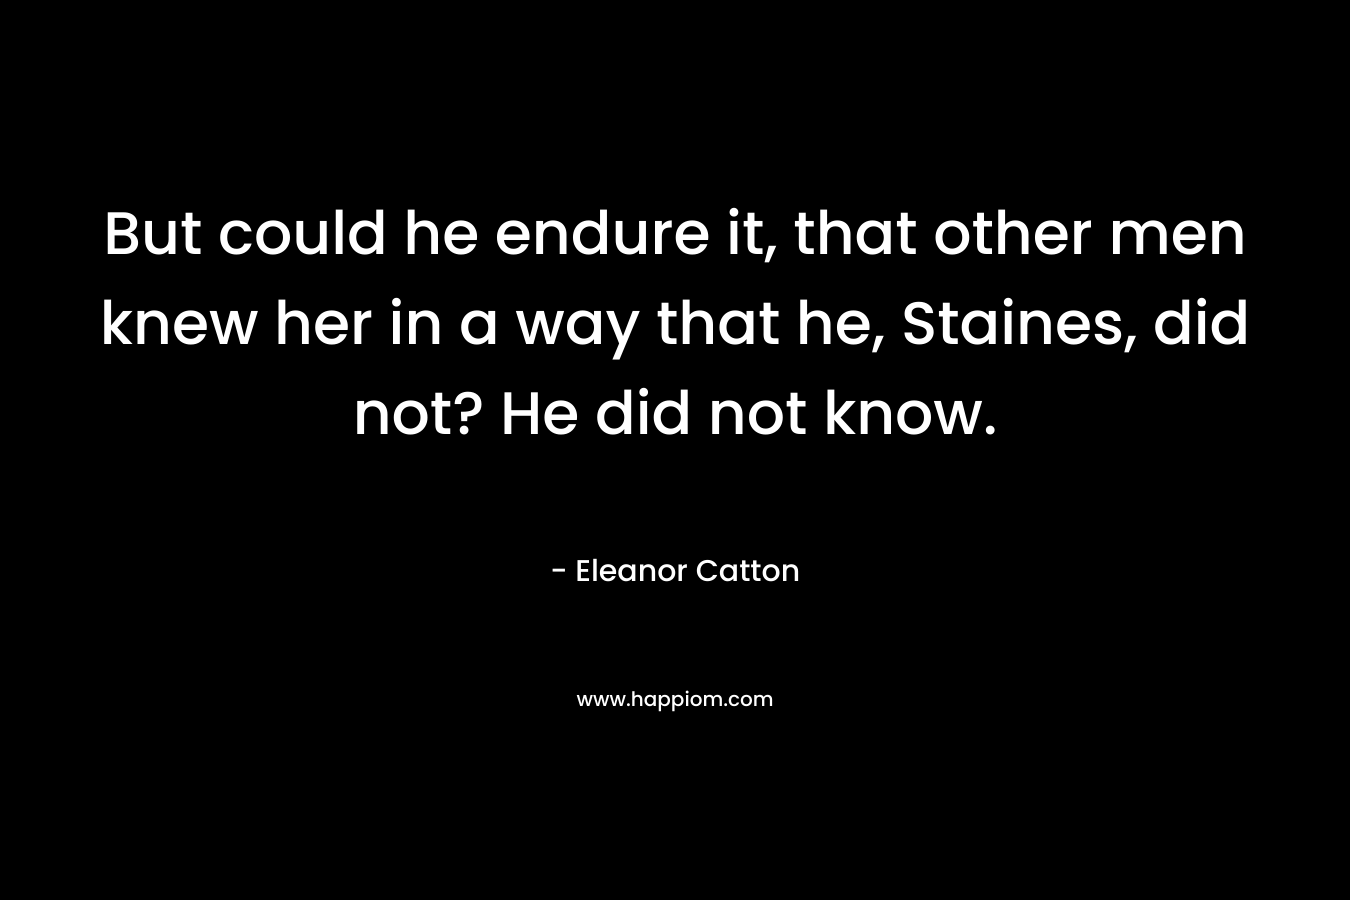 But could he endure it, that other men knew her in a way that he, Staines, did not? He did not know. – Eleanor Catton